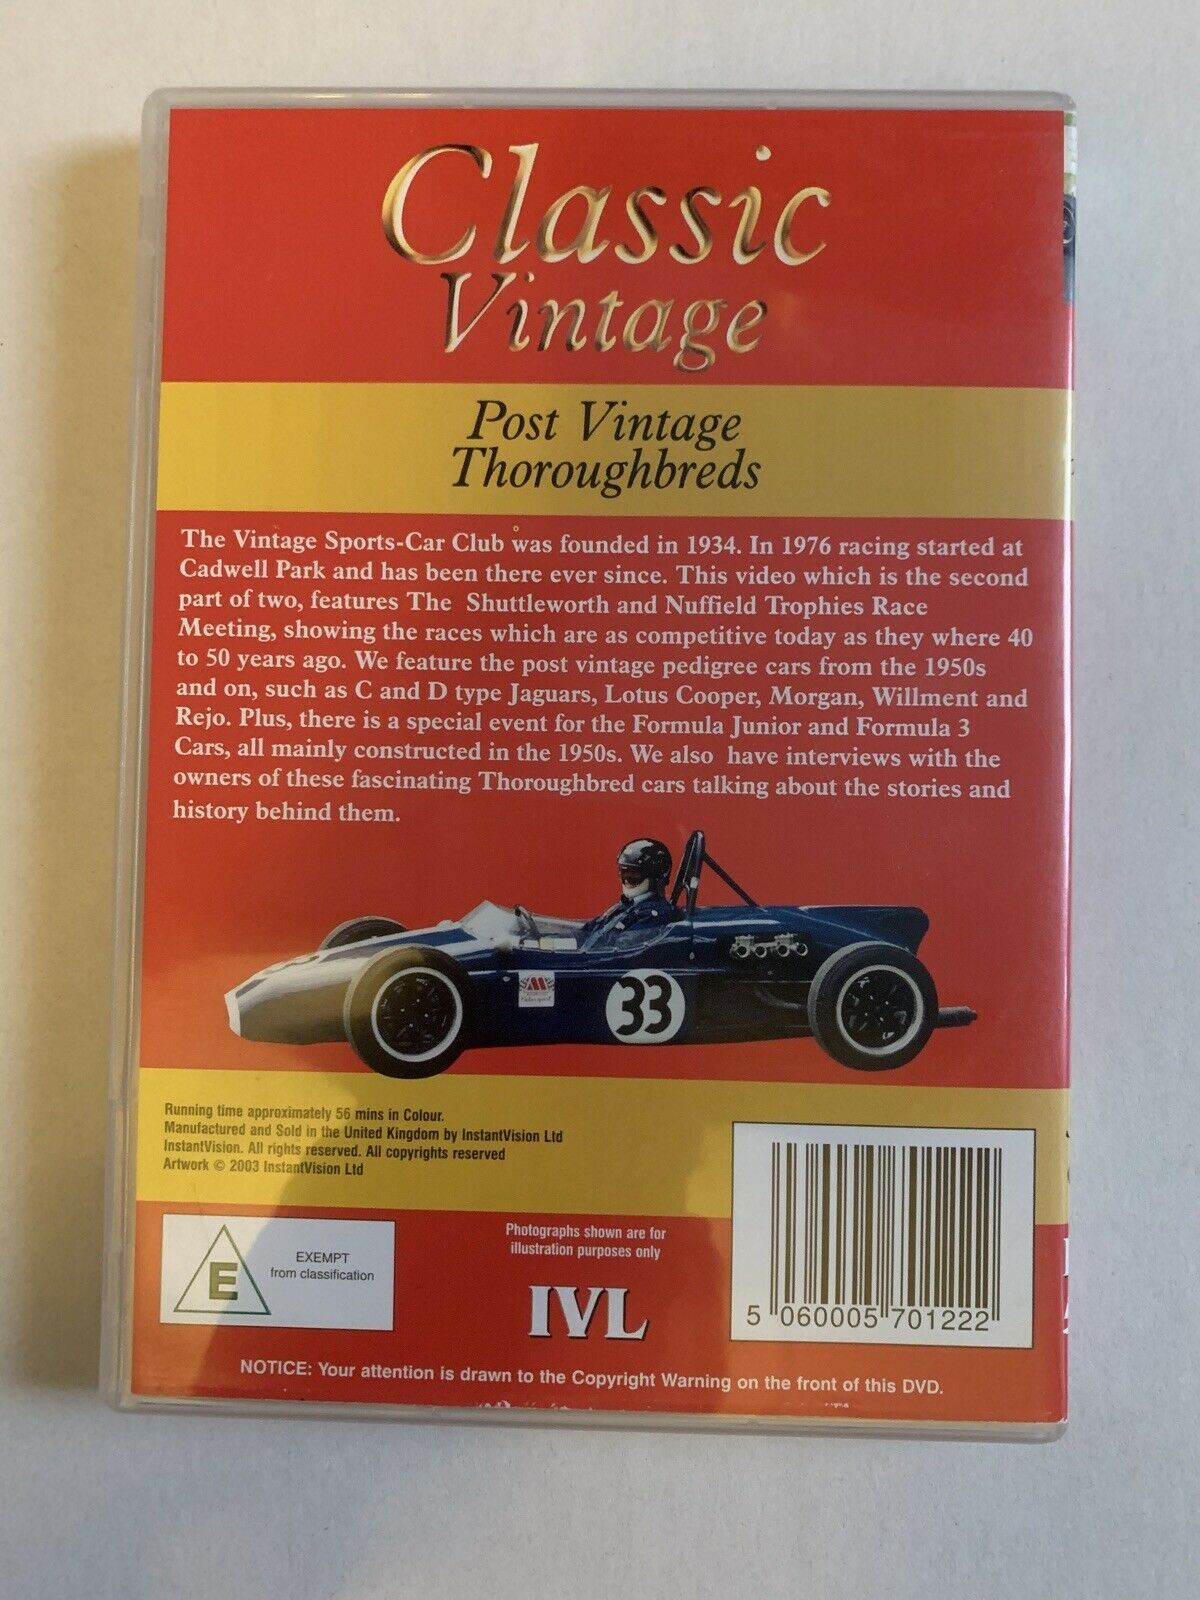 Classic Vintage Sports Cars - Post Vintage Thoroughbreds (DVD, 2003)